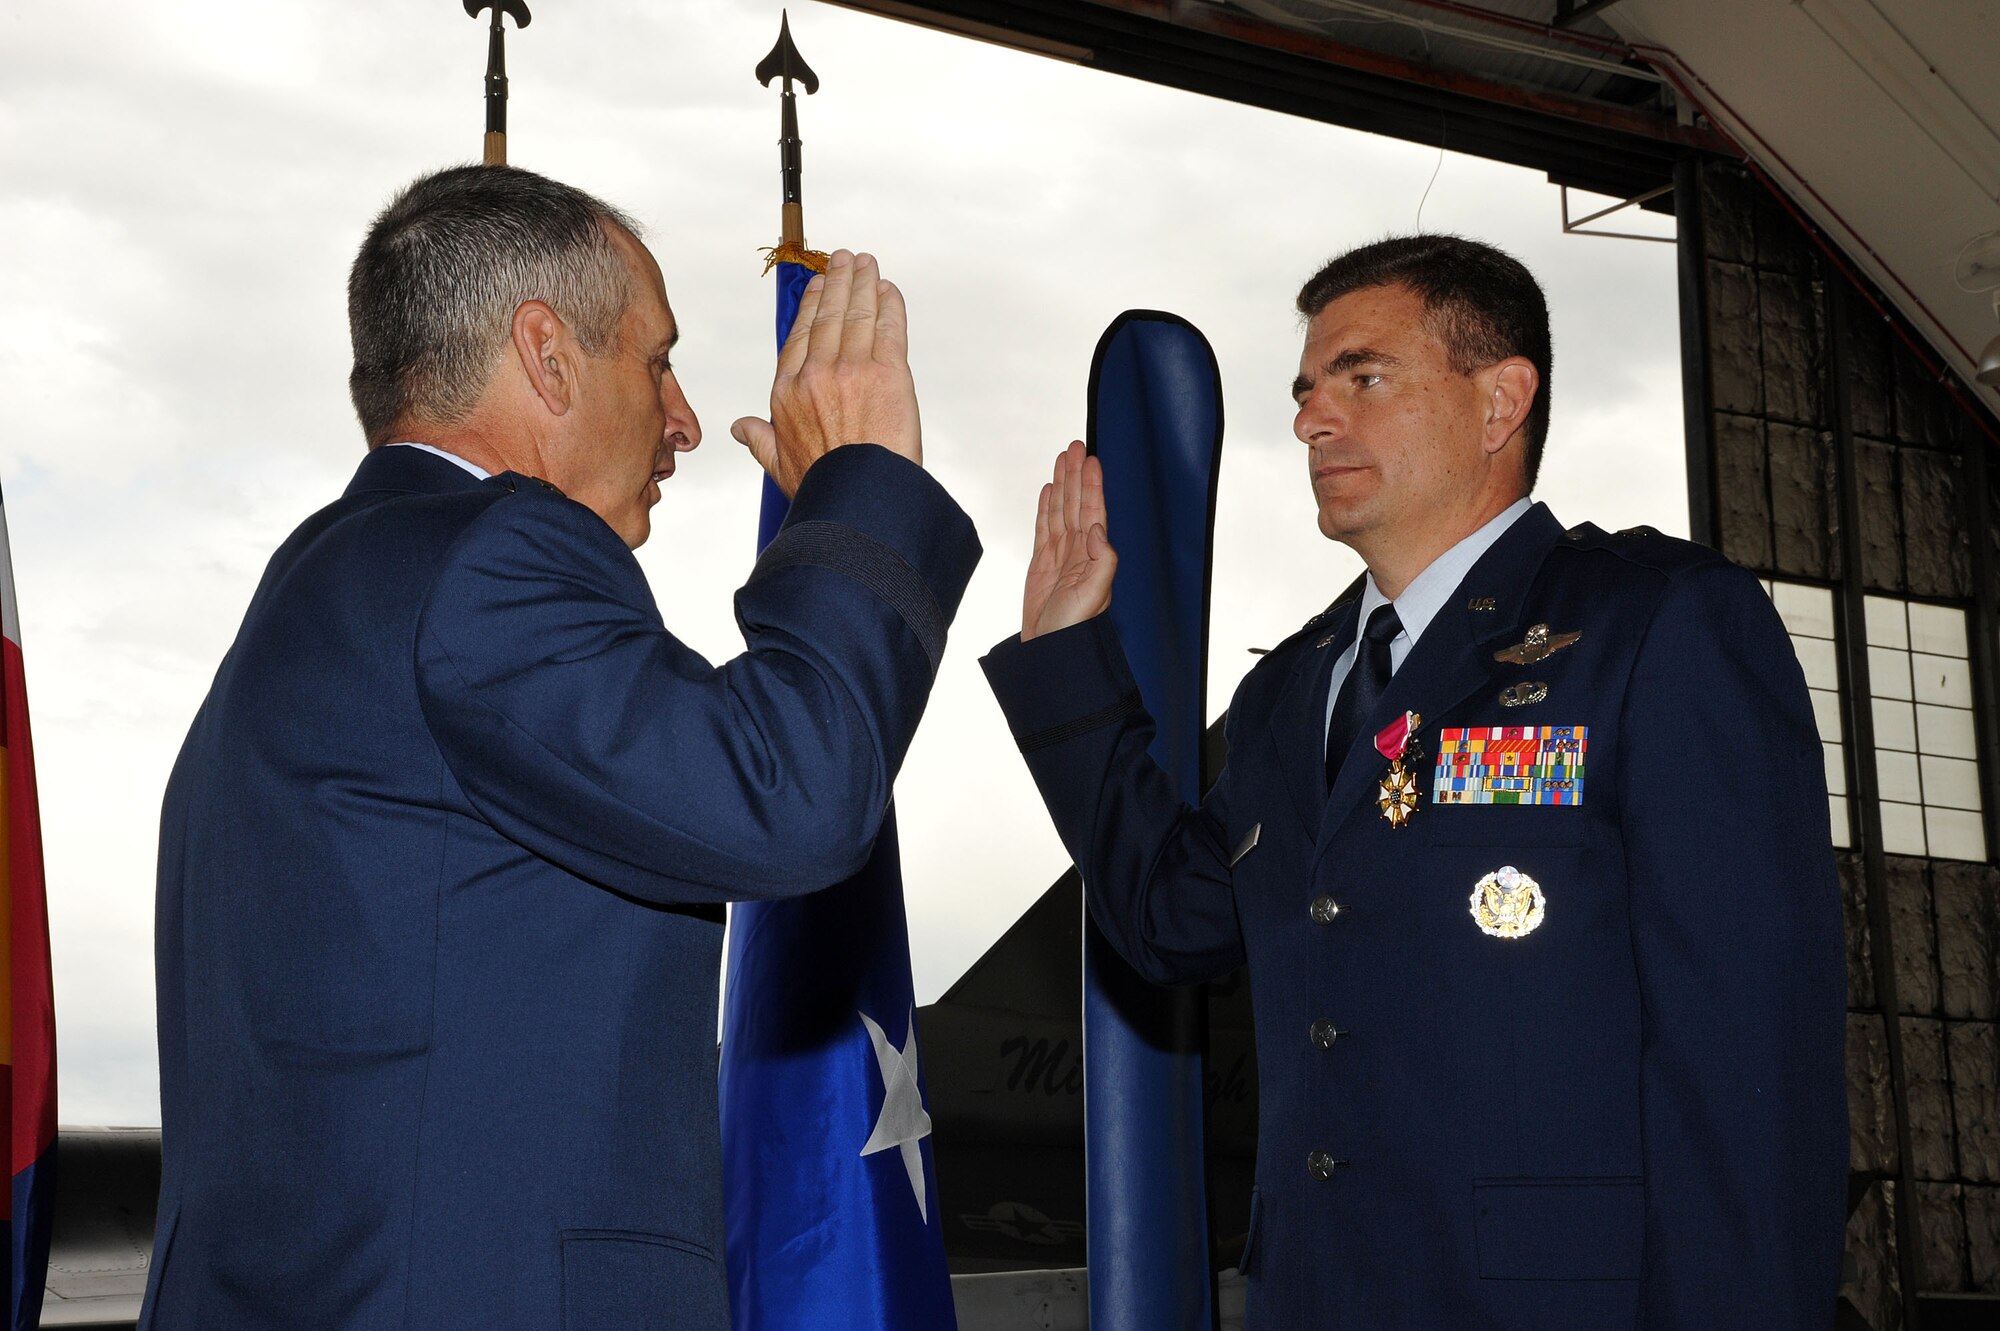 The Adjutant General of Colorado Maj. Gen. H. Michael Edwards administers the Oath of Office to Brig. Gen. Michael Loh July 10.  Loh will be relocating to Washington D.C. to serve as the Air National Guard advisor to the Air Force Chief of Staff.  He is  the former 140th Operation Group Commander, 140th Wing, Colorado Air National Guard, Buckley Air Force Base, Colo.  Loh has been a pilot for the 120th Fighter Squadron at Buckley AFB since 1991.  U.S. Air Force Photo By: Tech. Sgt. Wolfram M. Stumpf (Released)  